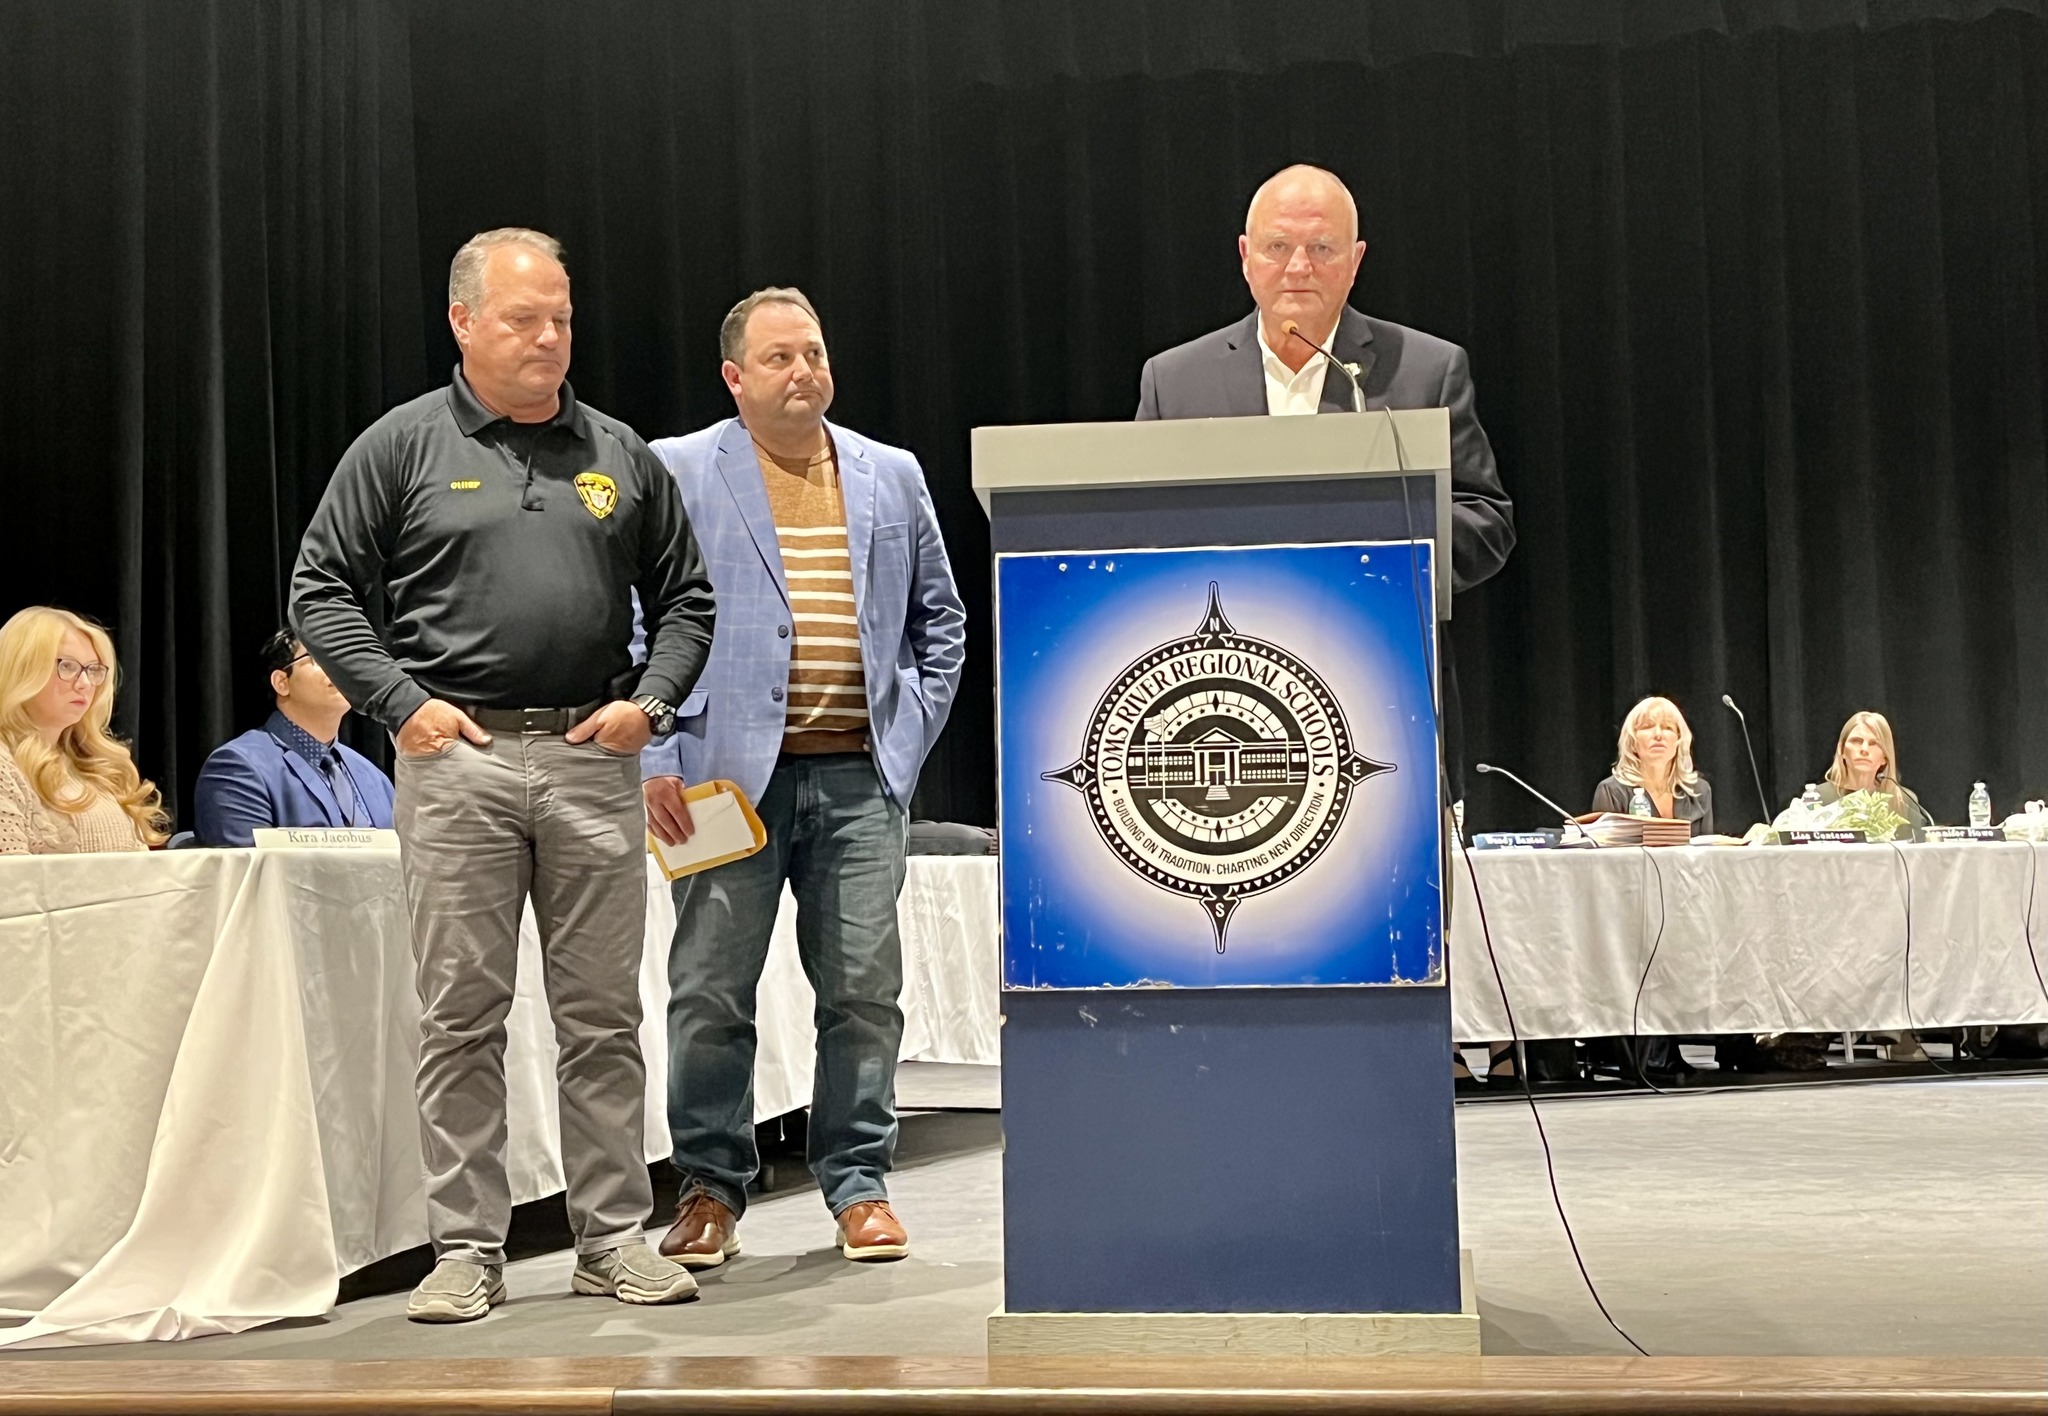 Mayor Mo Hill and Police Chief Mitch Little presented over $3400 raised by Township employees and officers to Superintendent Mike Citta during the Toms River Board of Education meeting on Wednesday for the family of Jena LeRiche,